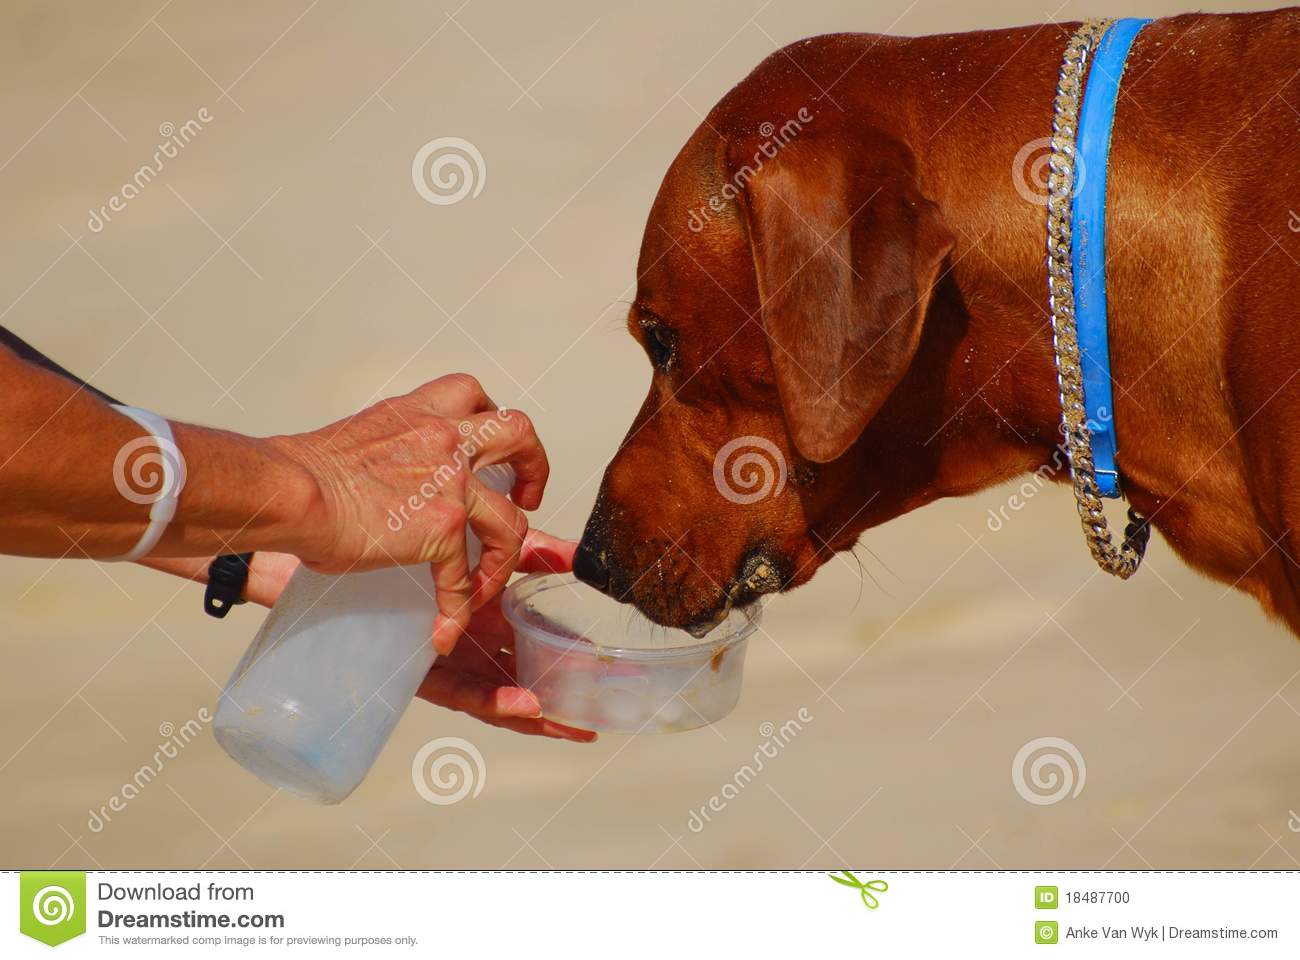 Giving Her Big Brown Thirsty Dog Water To Drink In The Summer Heat